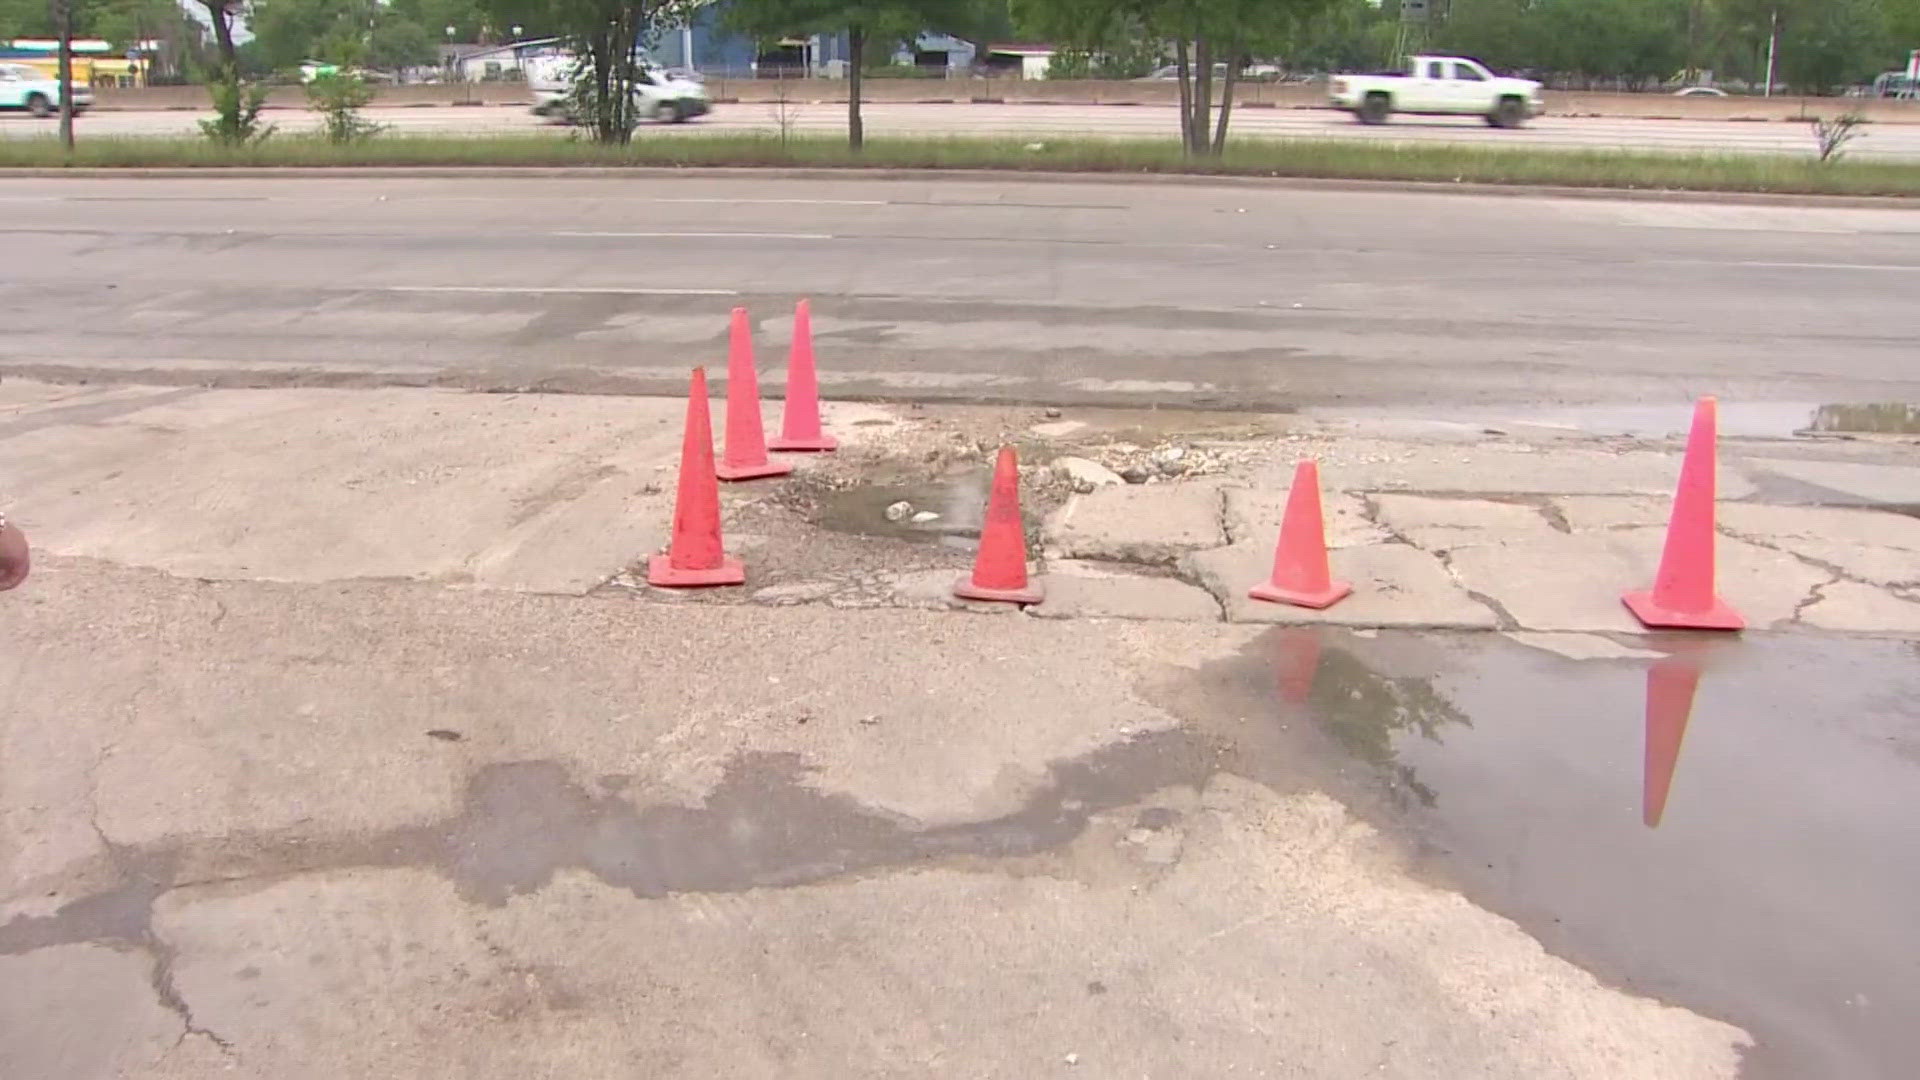 The general manager of Eastex Collision Repair said an estimated cost to repair their driveway eroded by the leaking fire hydrant is $20,000.